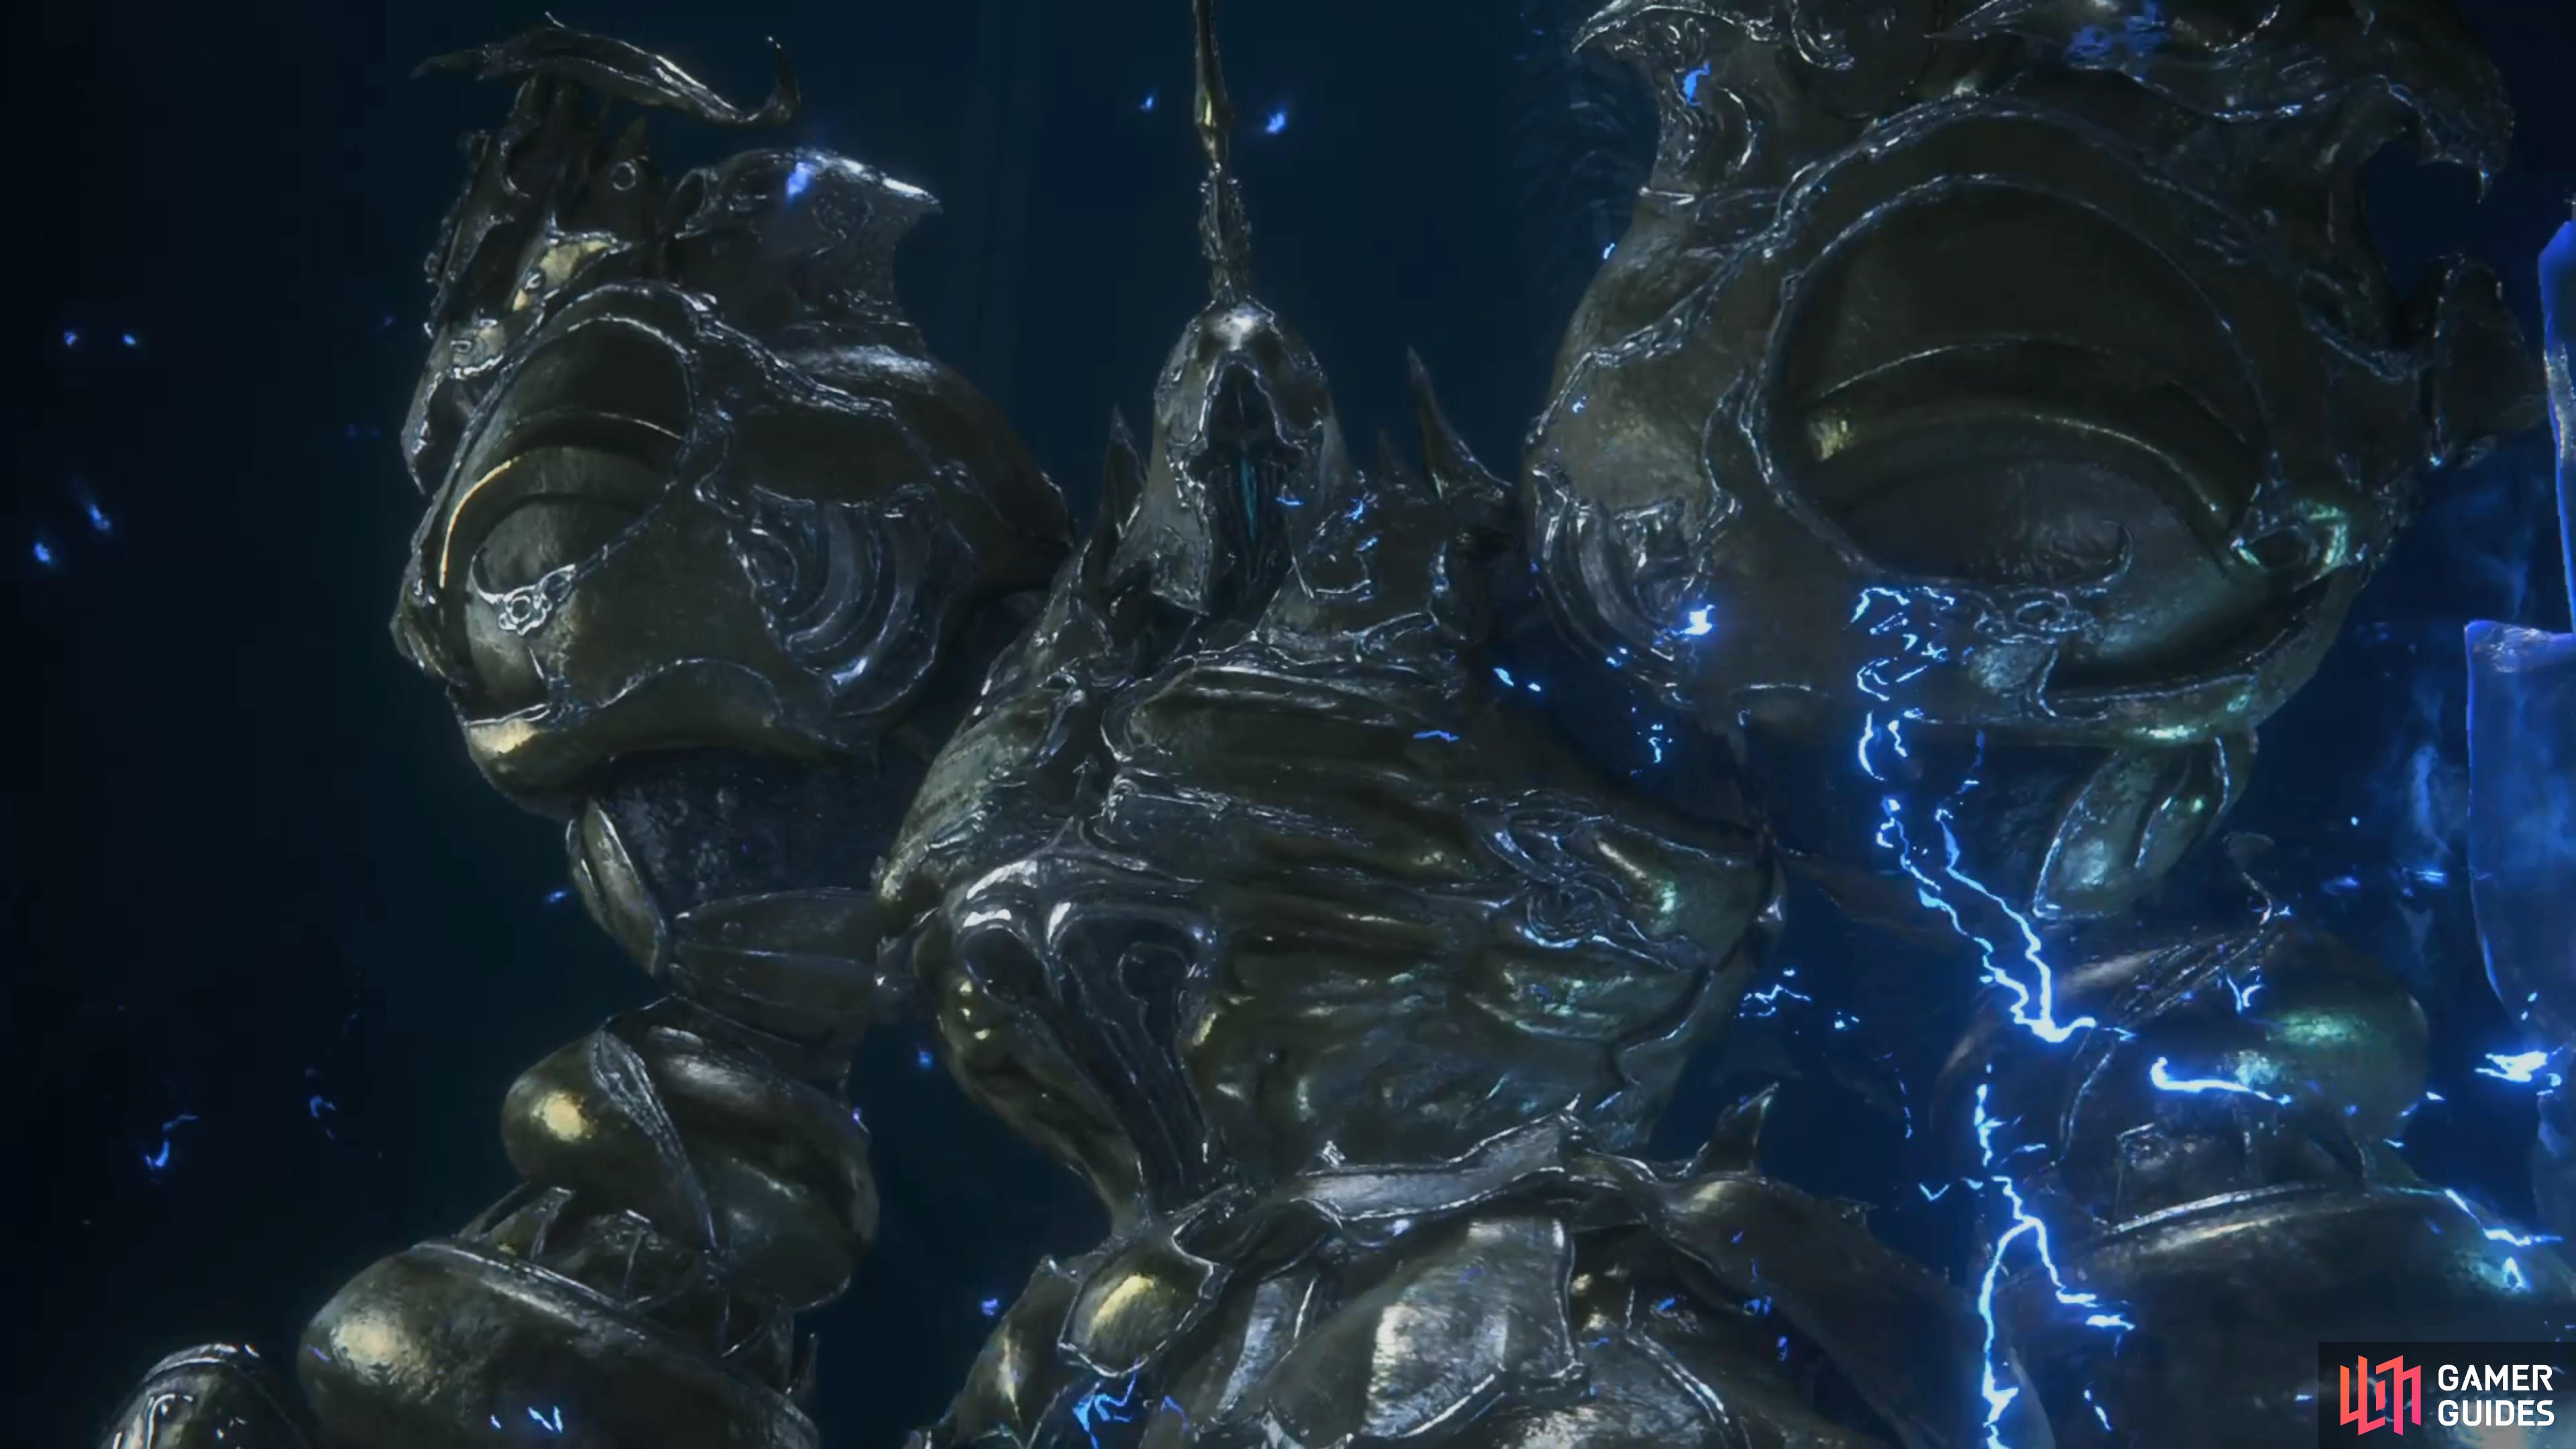 The Aurum Giant is a familiar, but new boss that is fought right after Control Node.